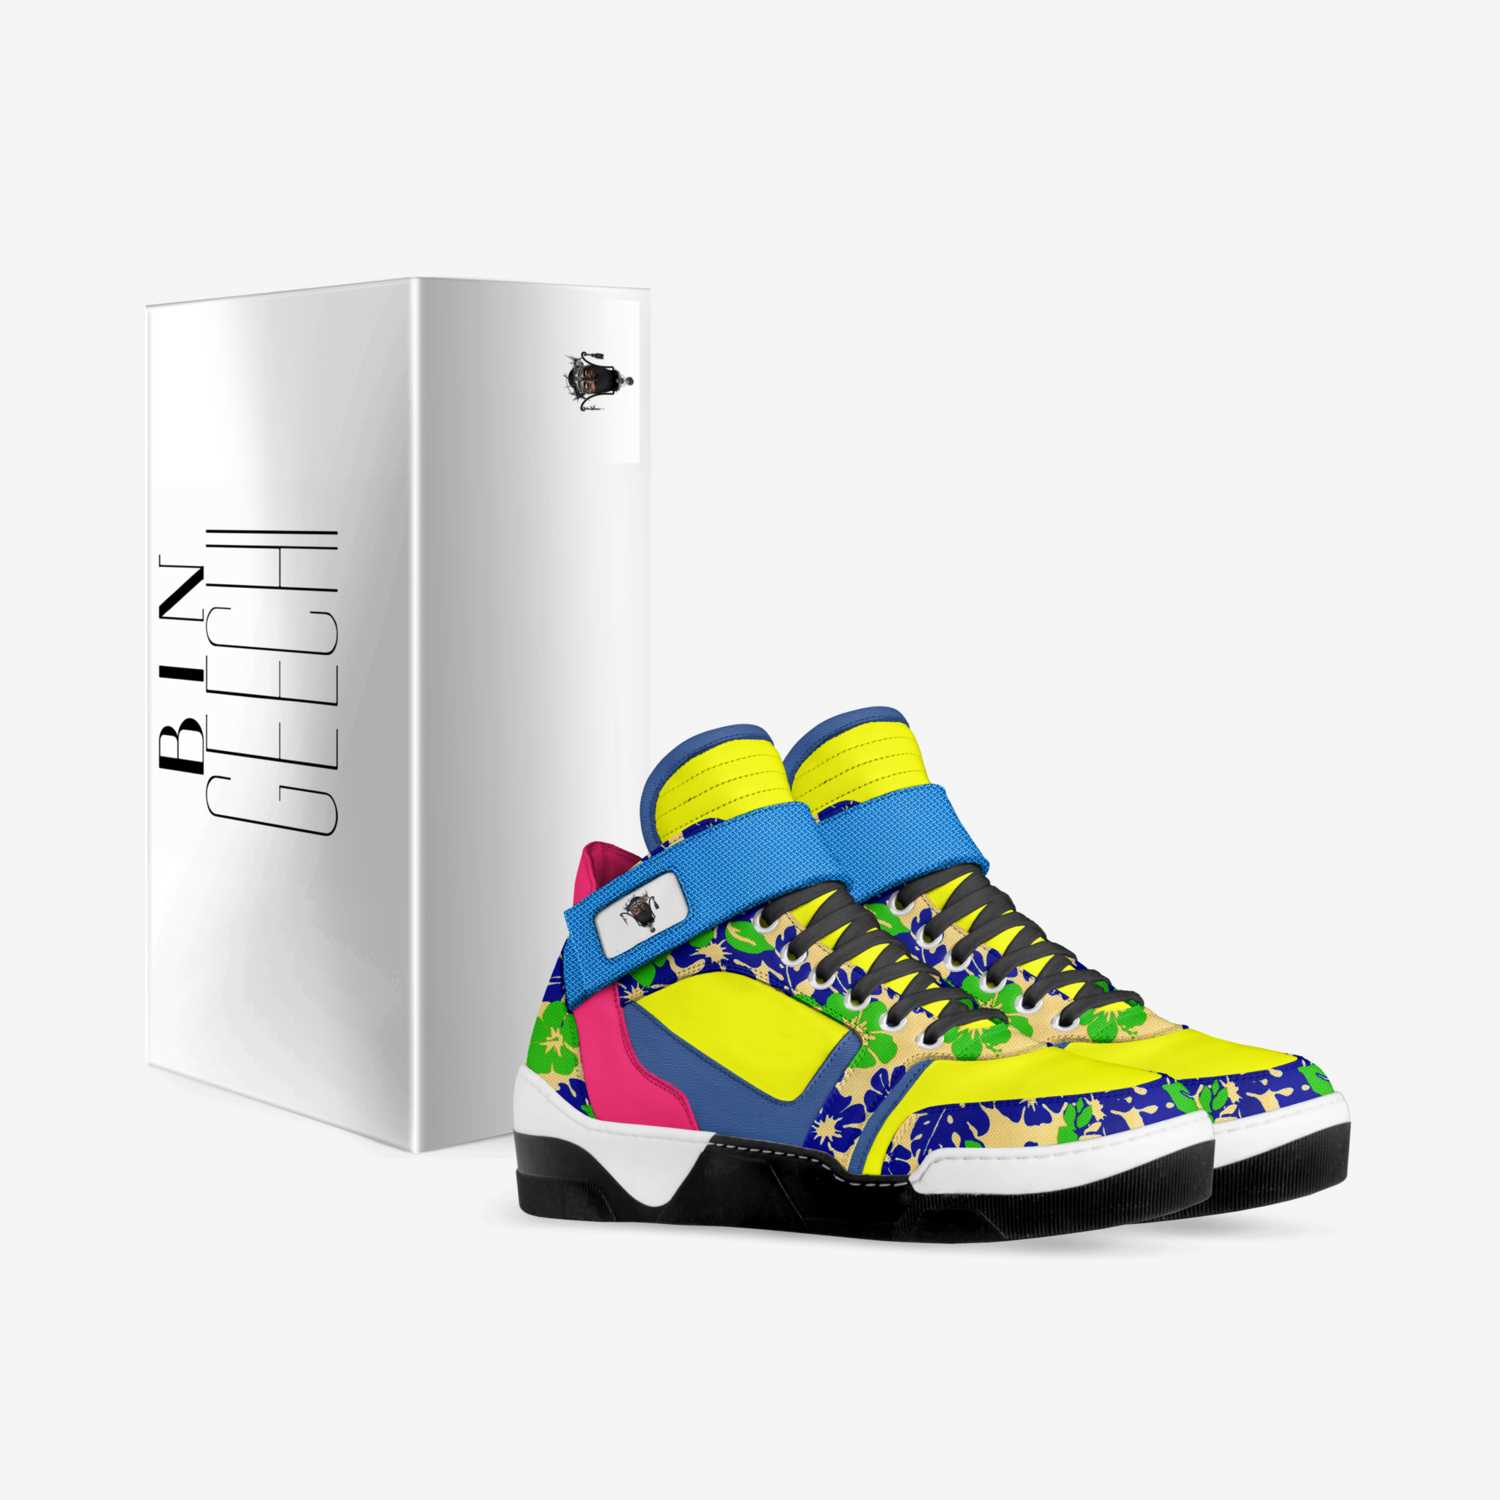 BIN GEECHI FREQz custom made in Italy shoes by Rodrick Cliche | Box view